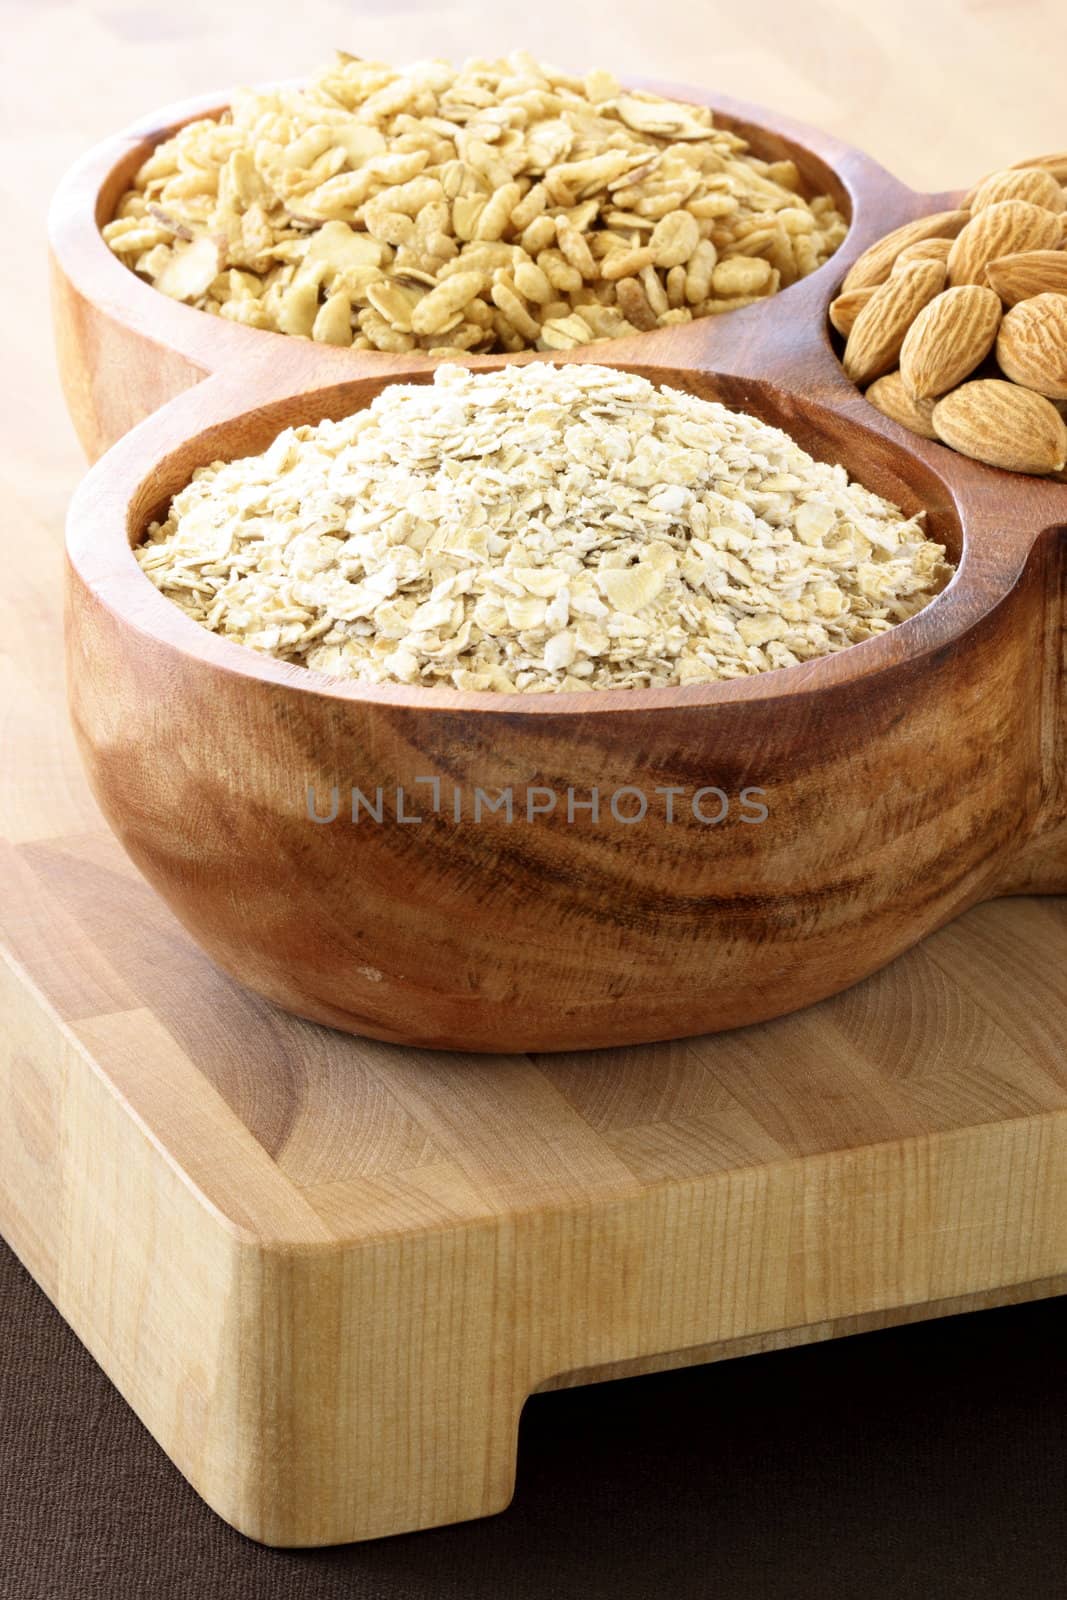 fresh healthy rolled oats, muesli and almonds on wooden rustic serving utensil. part of a healthy and delicious breakfast